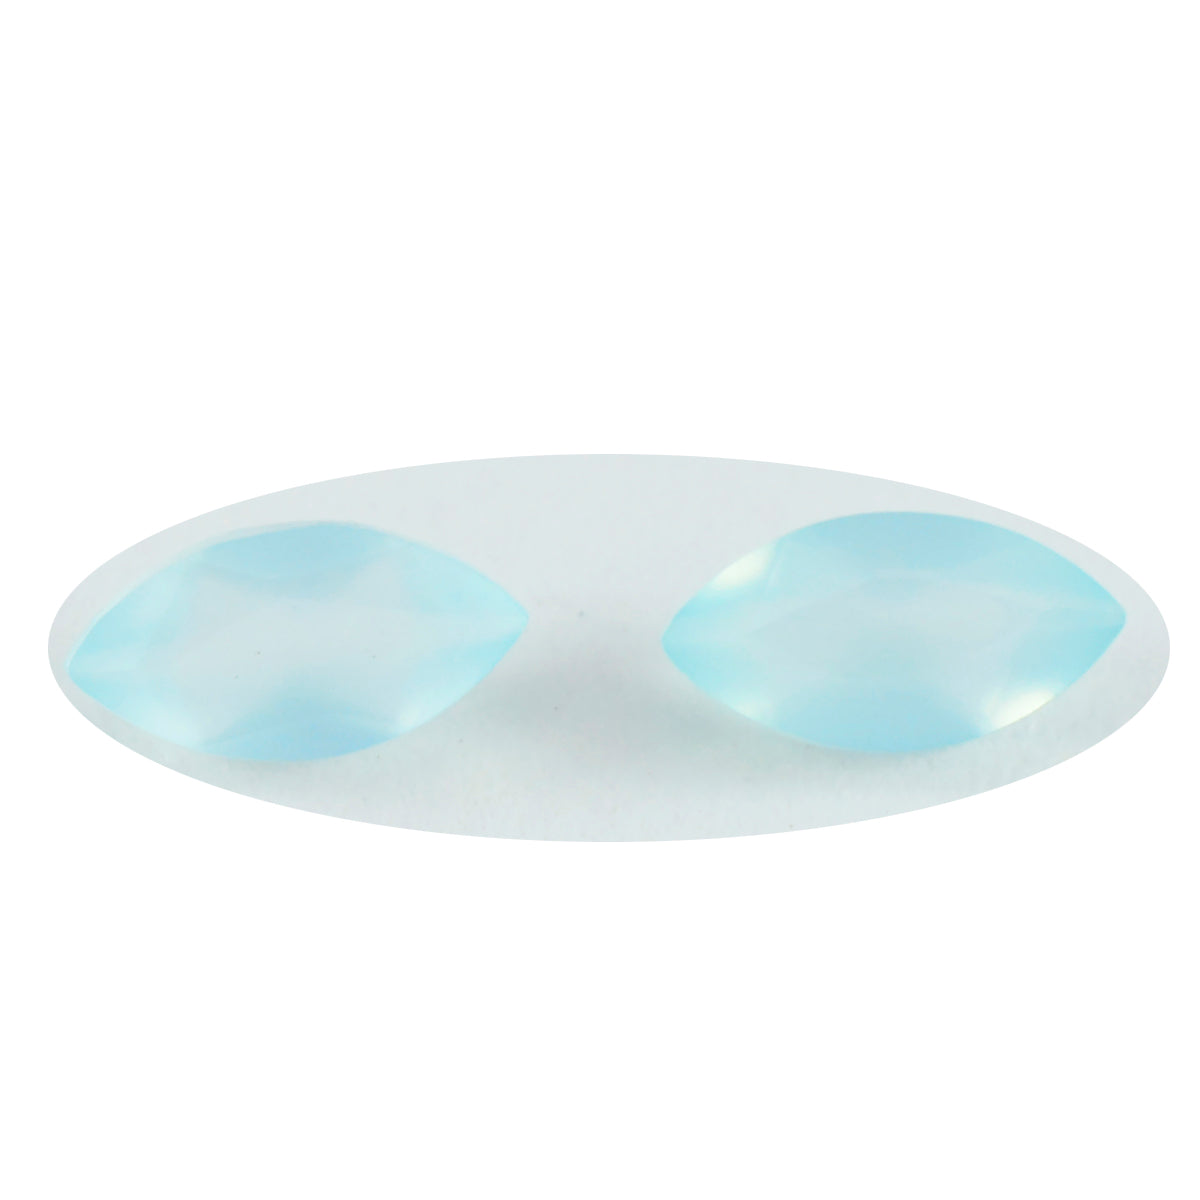 Riyogems 1PC Real Aqua Chalcedony Faceted 8x16 mm Marquise Shape A1 Quality Stone